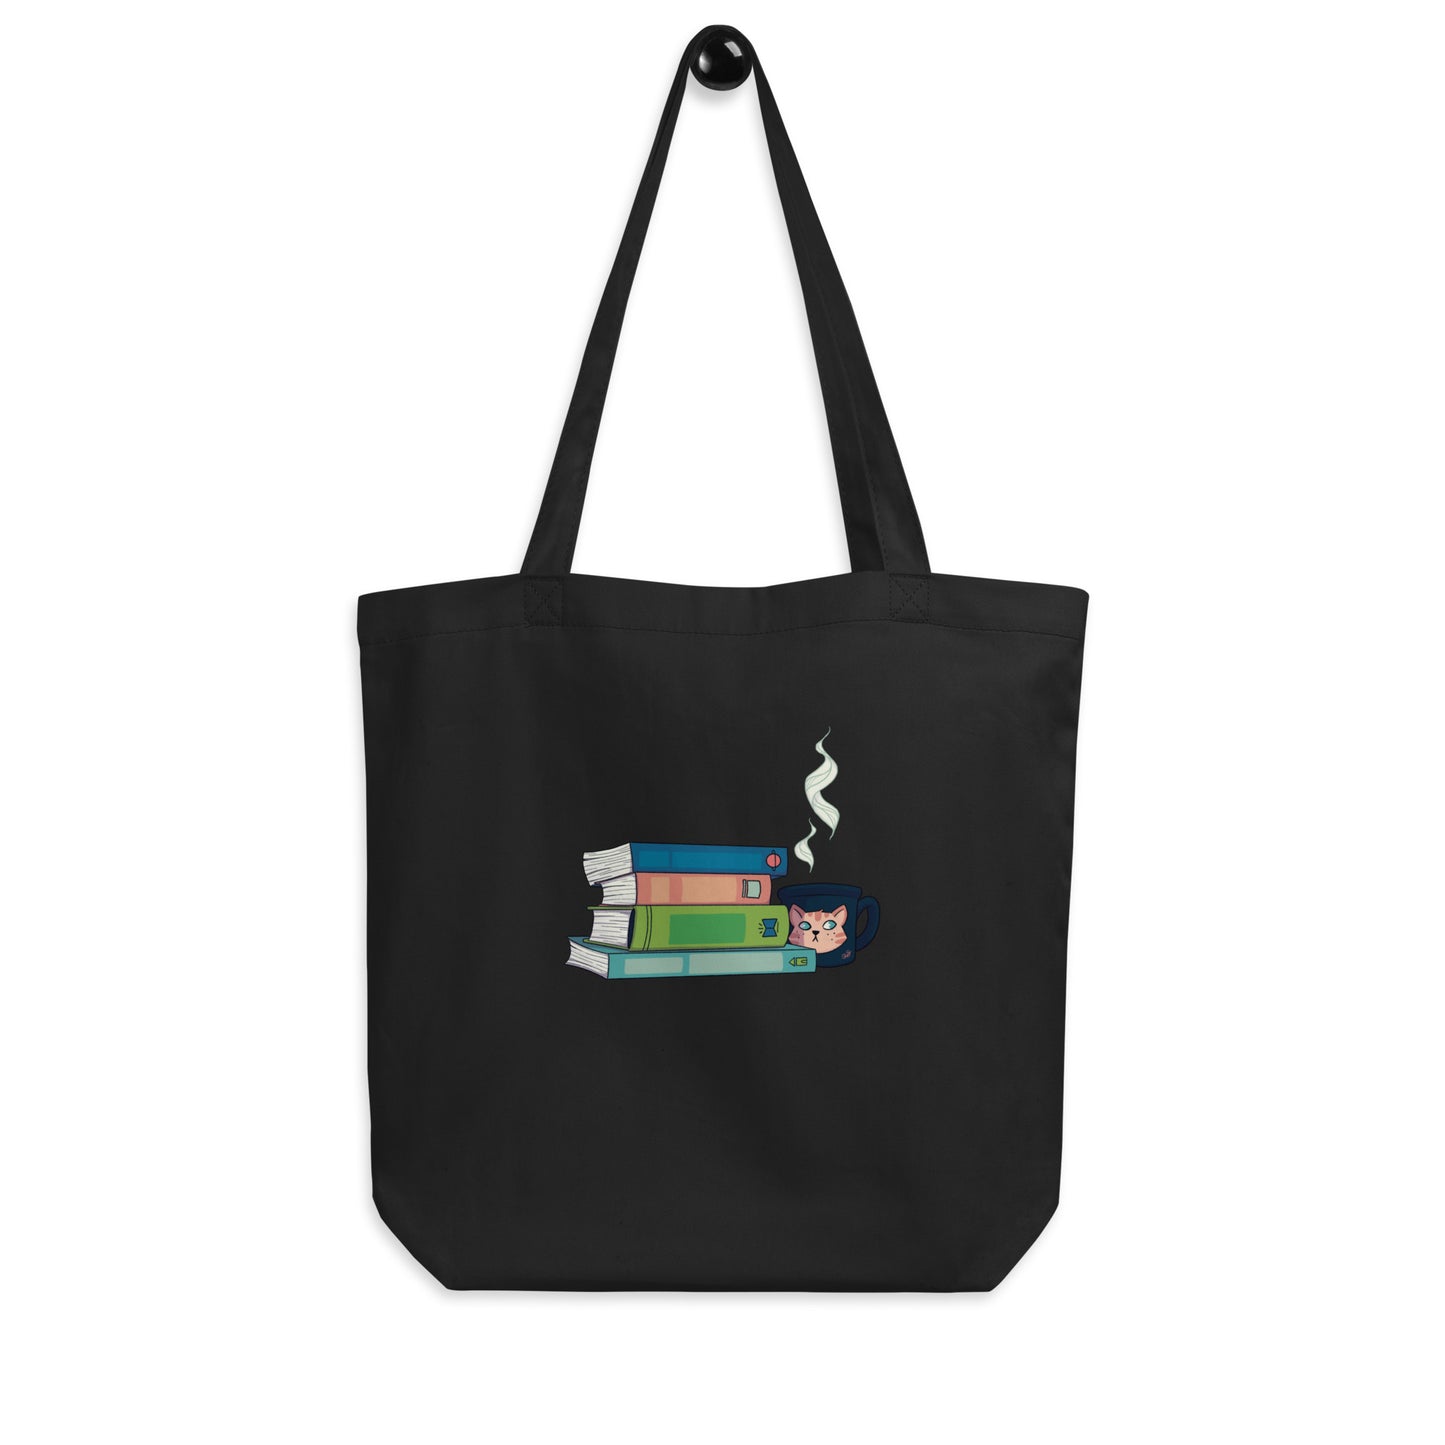 Stacks on Stacks (with Cats) Eco Tote Bag